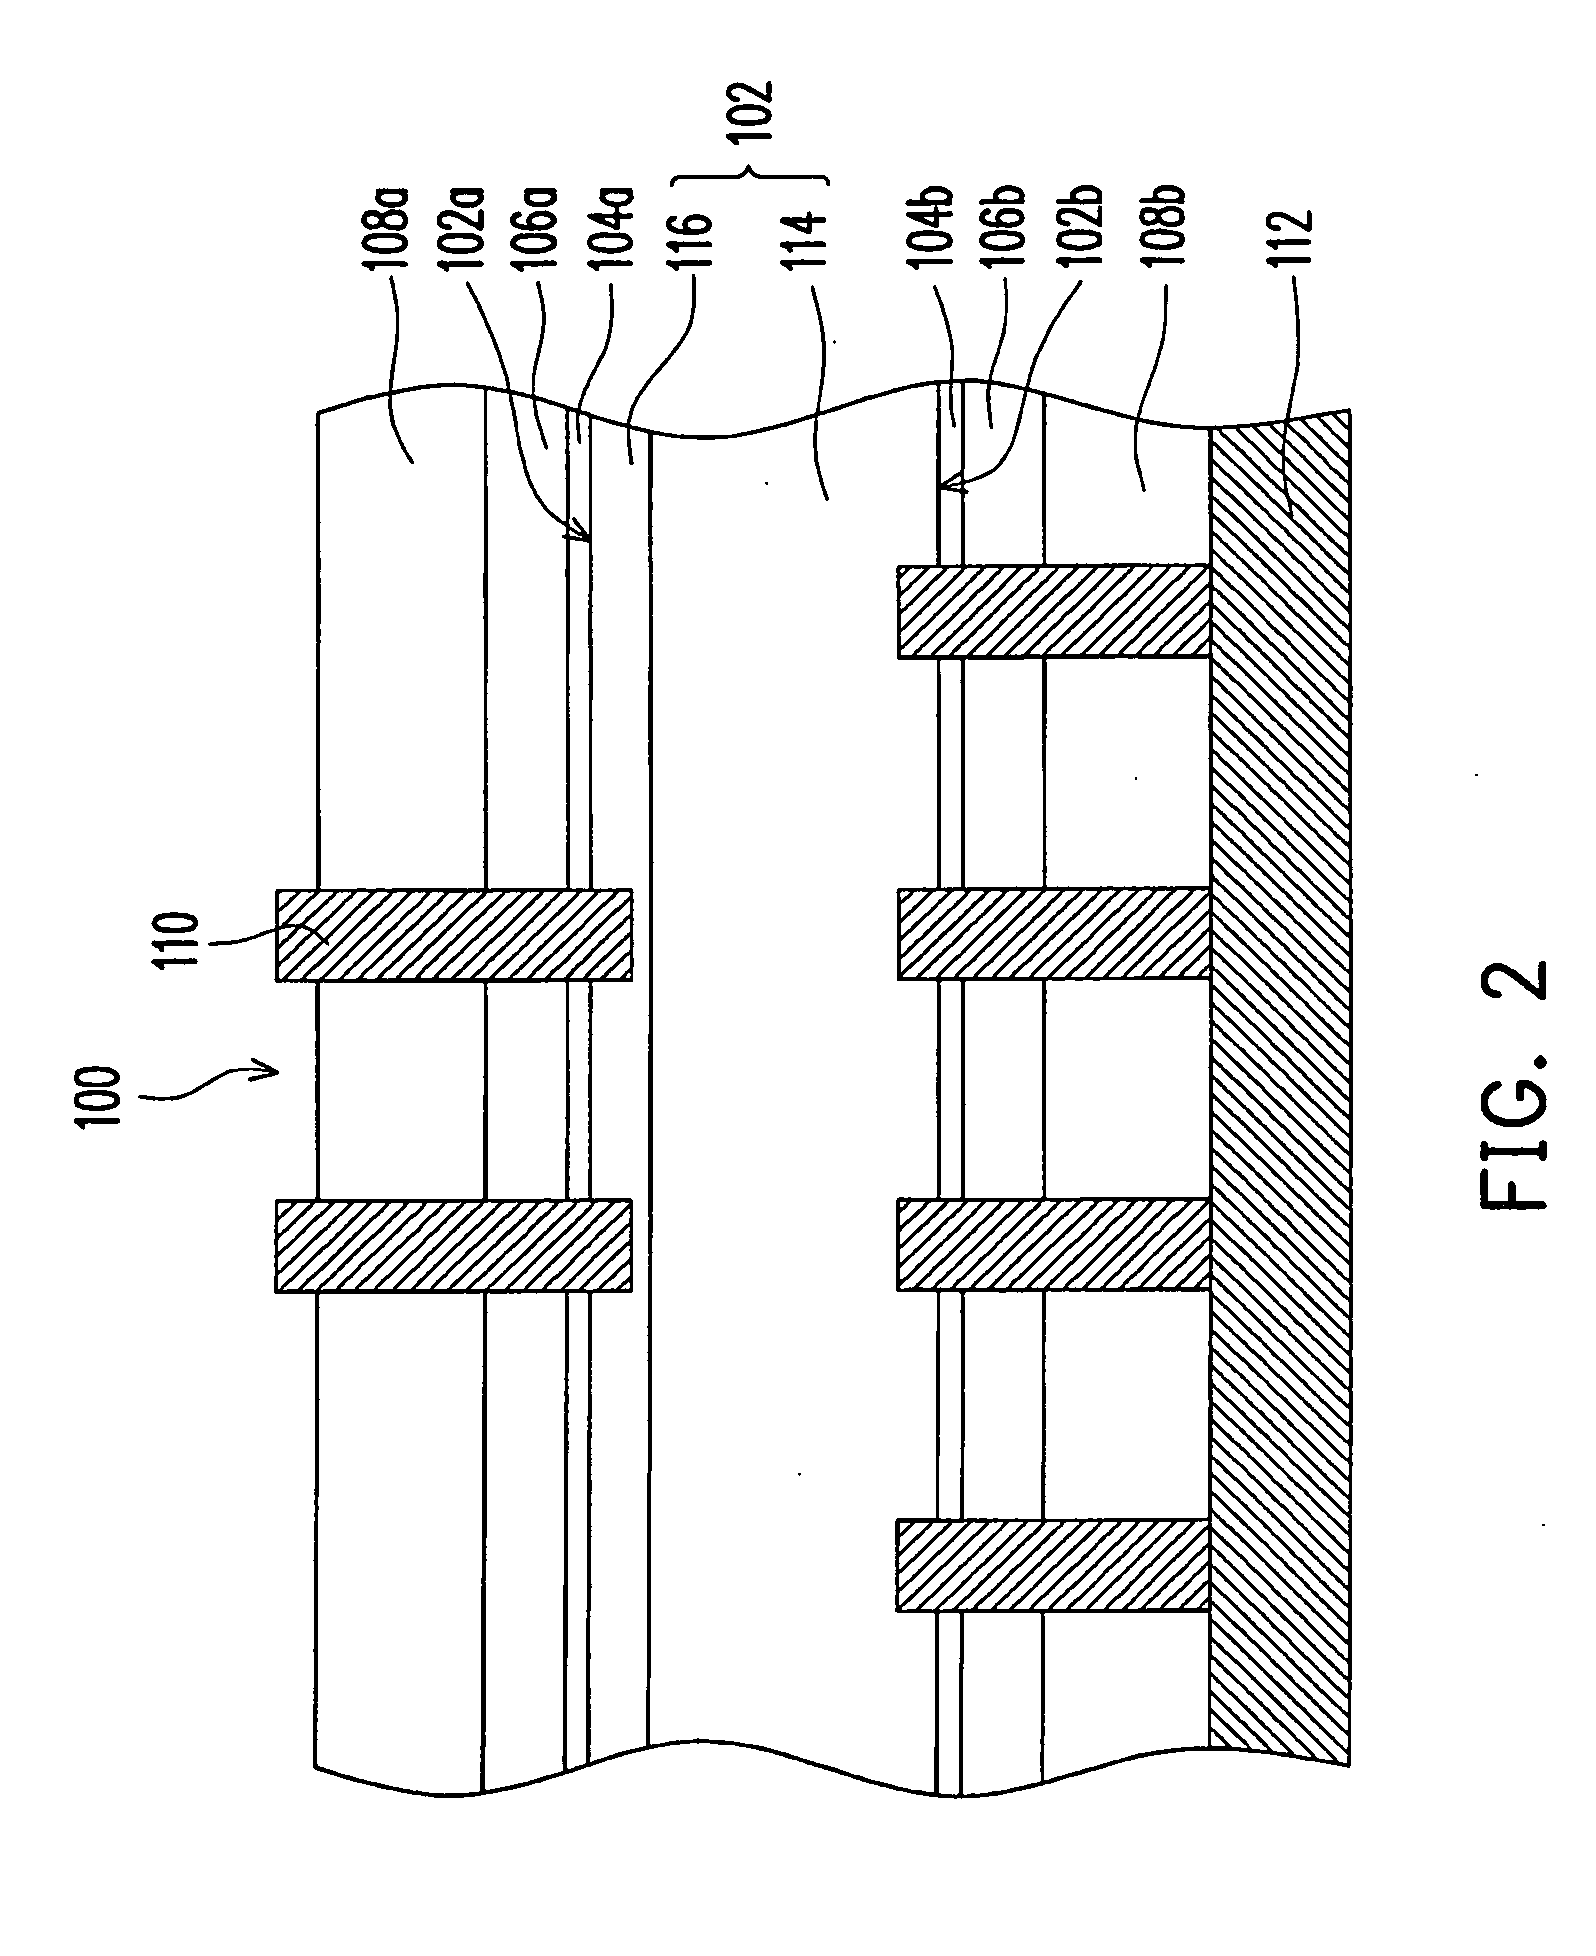 Passivation layer structure of solar cell and fabricating method thereof